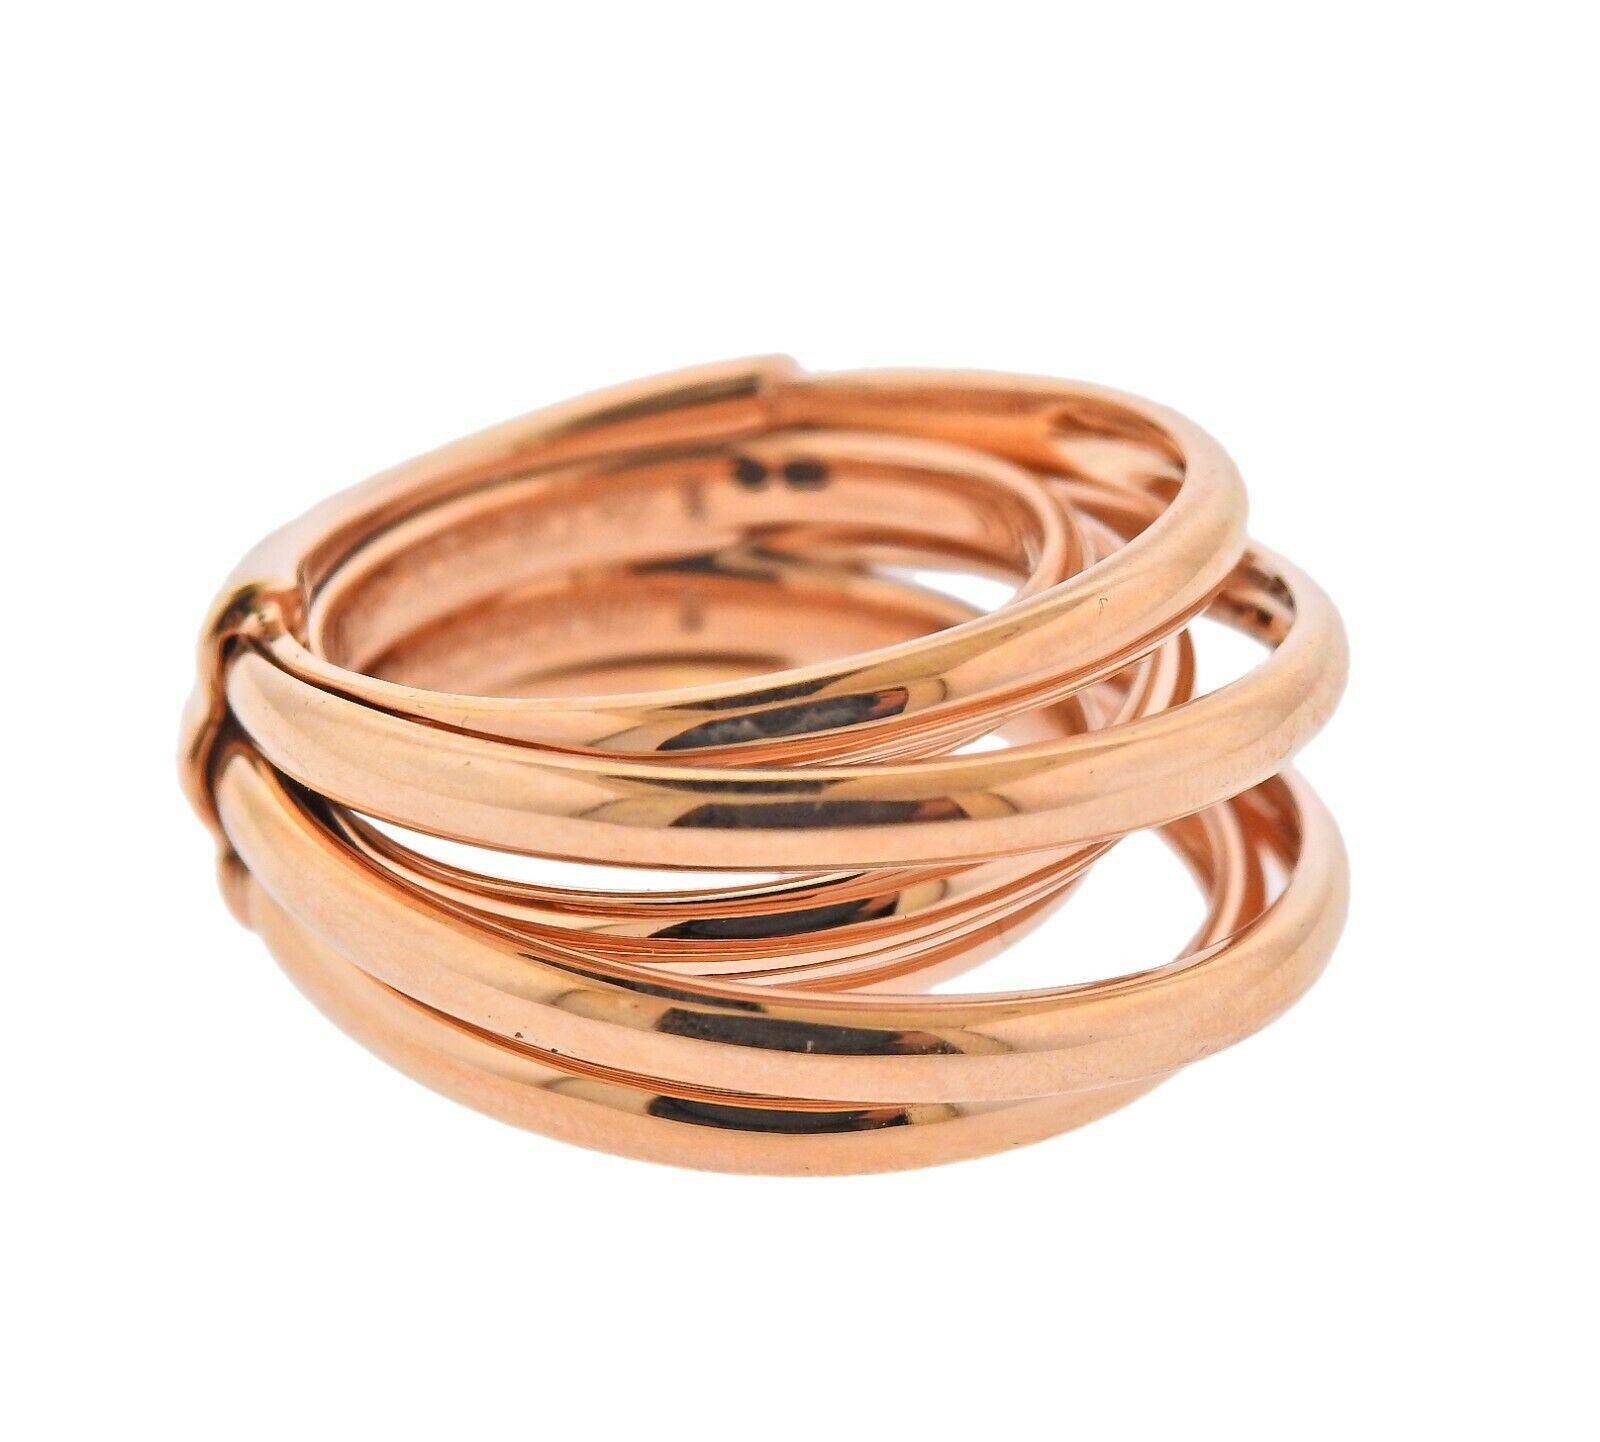 Brand new 18k rose gold Allegra Ring by De Grisogono. Ring sizes - 5 (51) , 6 (52) and 7 (55) ring top - 14mm wide. Marked - de Grisogono, Au750, B84591. Weight - 16.2 grams. Ring comes with COA, booklet and box. Retail $5300